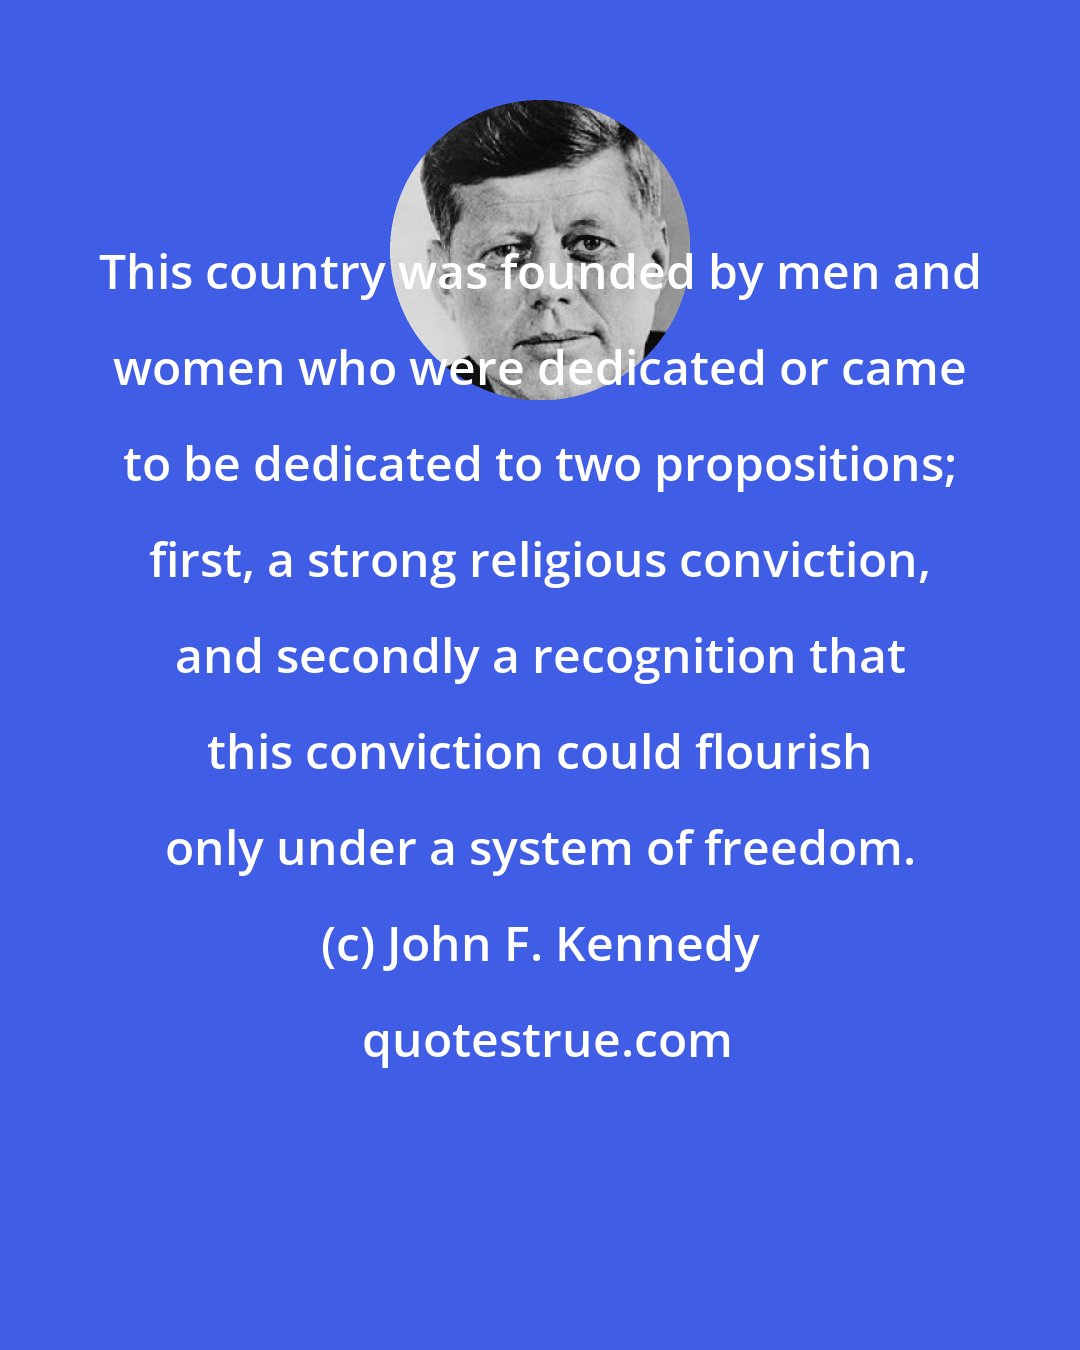 John F. Kennedy: This country was founded by men and women who were dedicated or came to be dedicated to two propositions; first, a strong religious conviction, and secondly a recognition that this conviction could flourish only under a system of freedom.